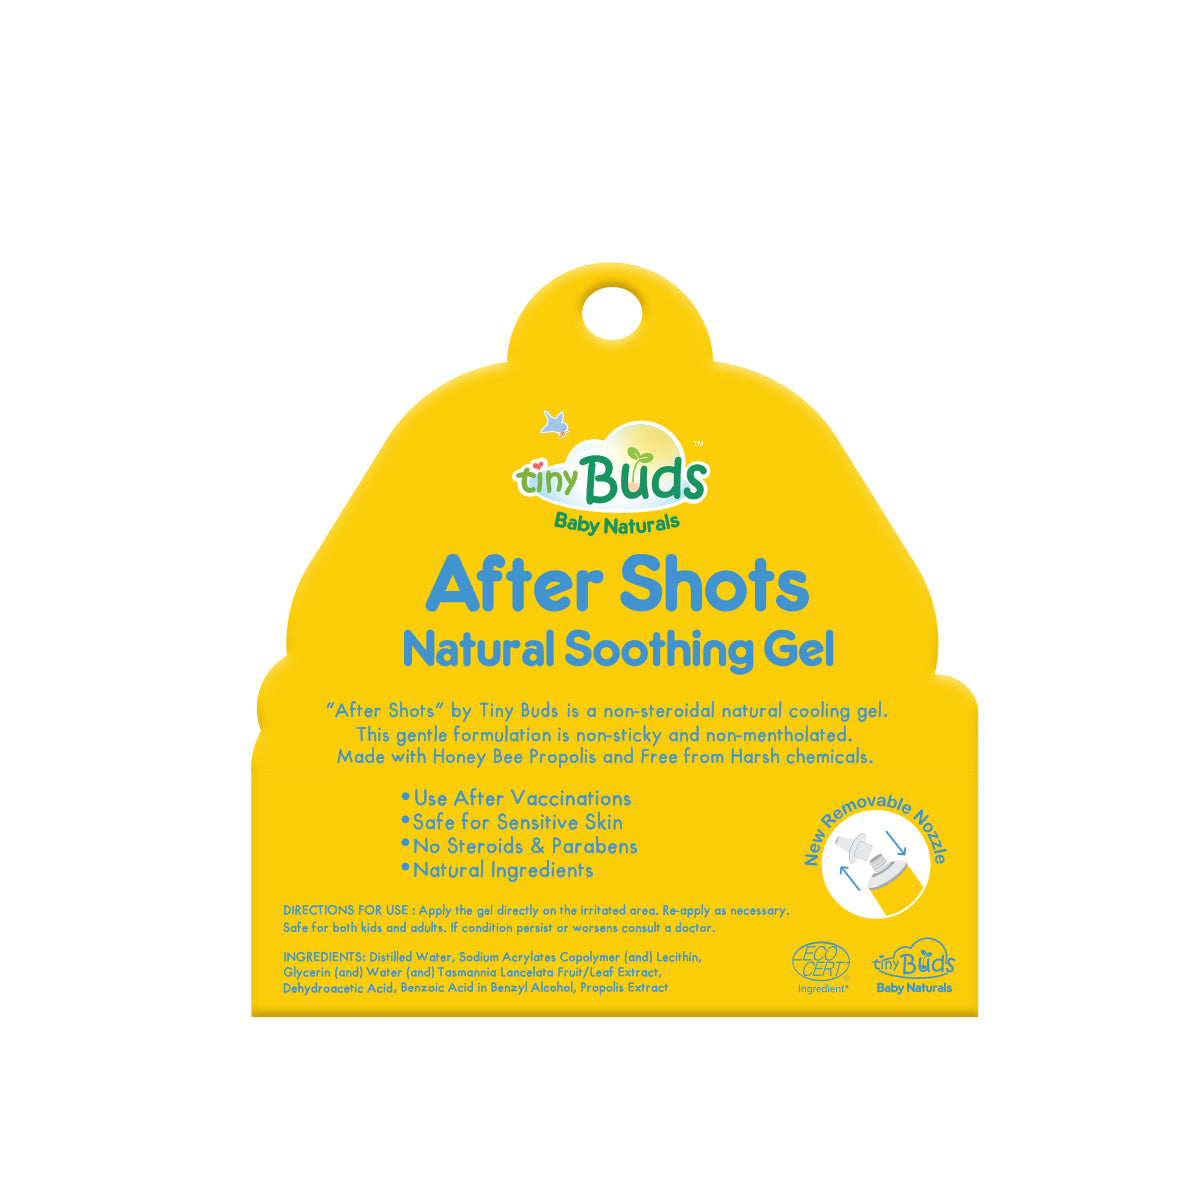 Tiny Buds After Shots Soothing Gel (15g)